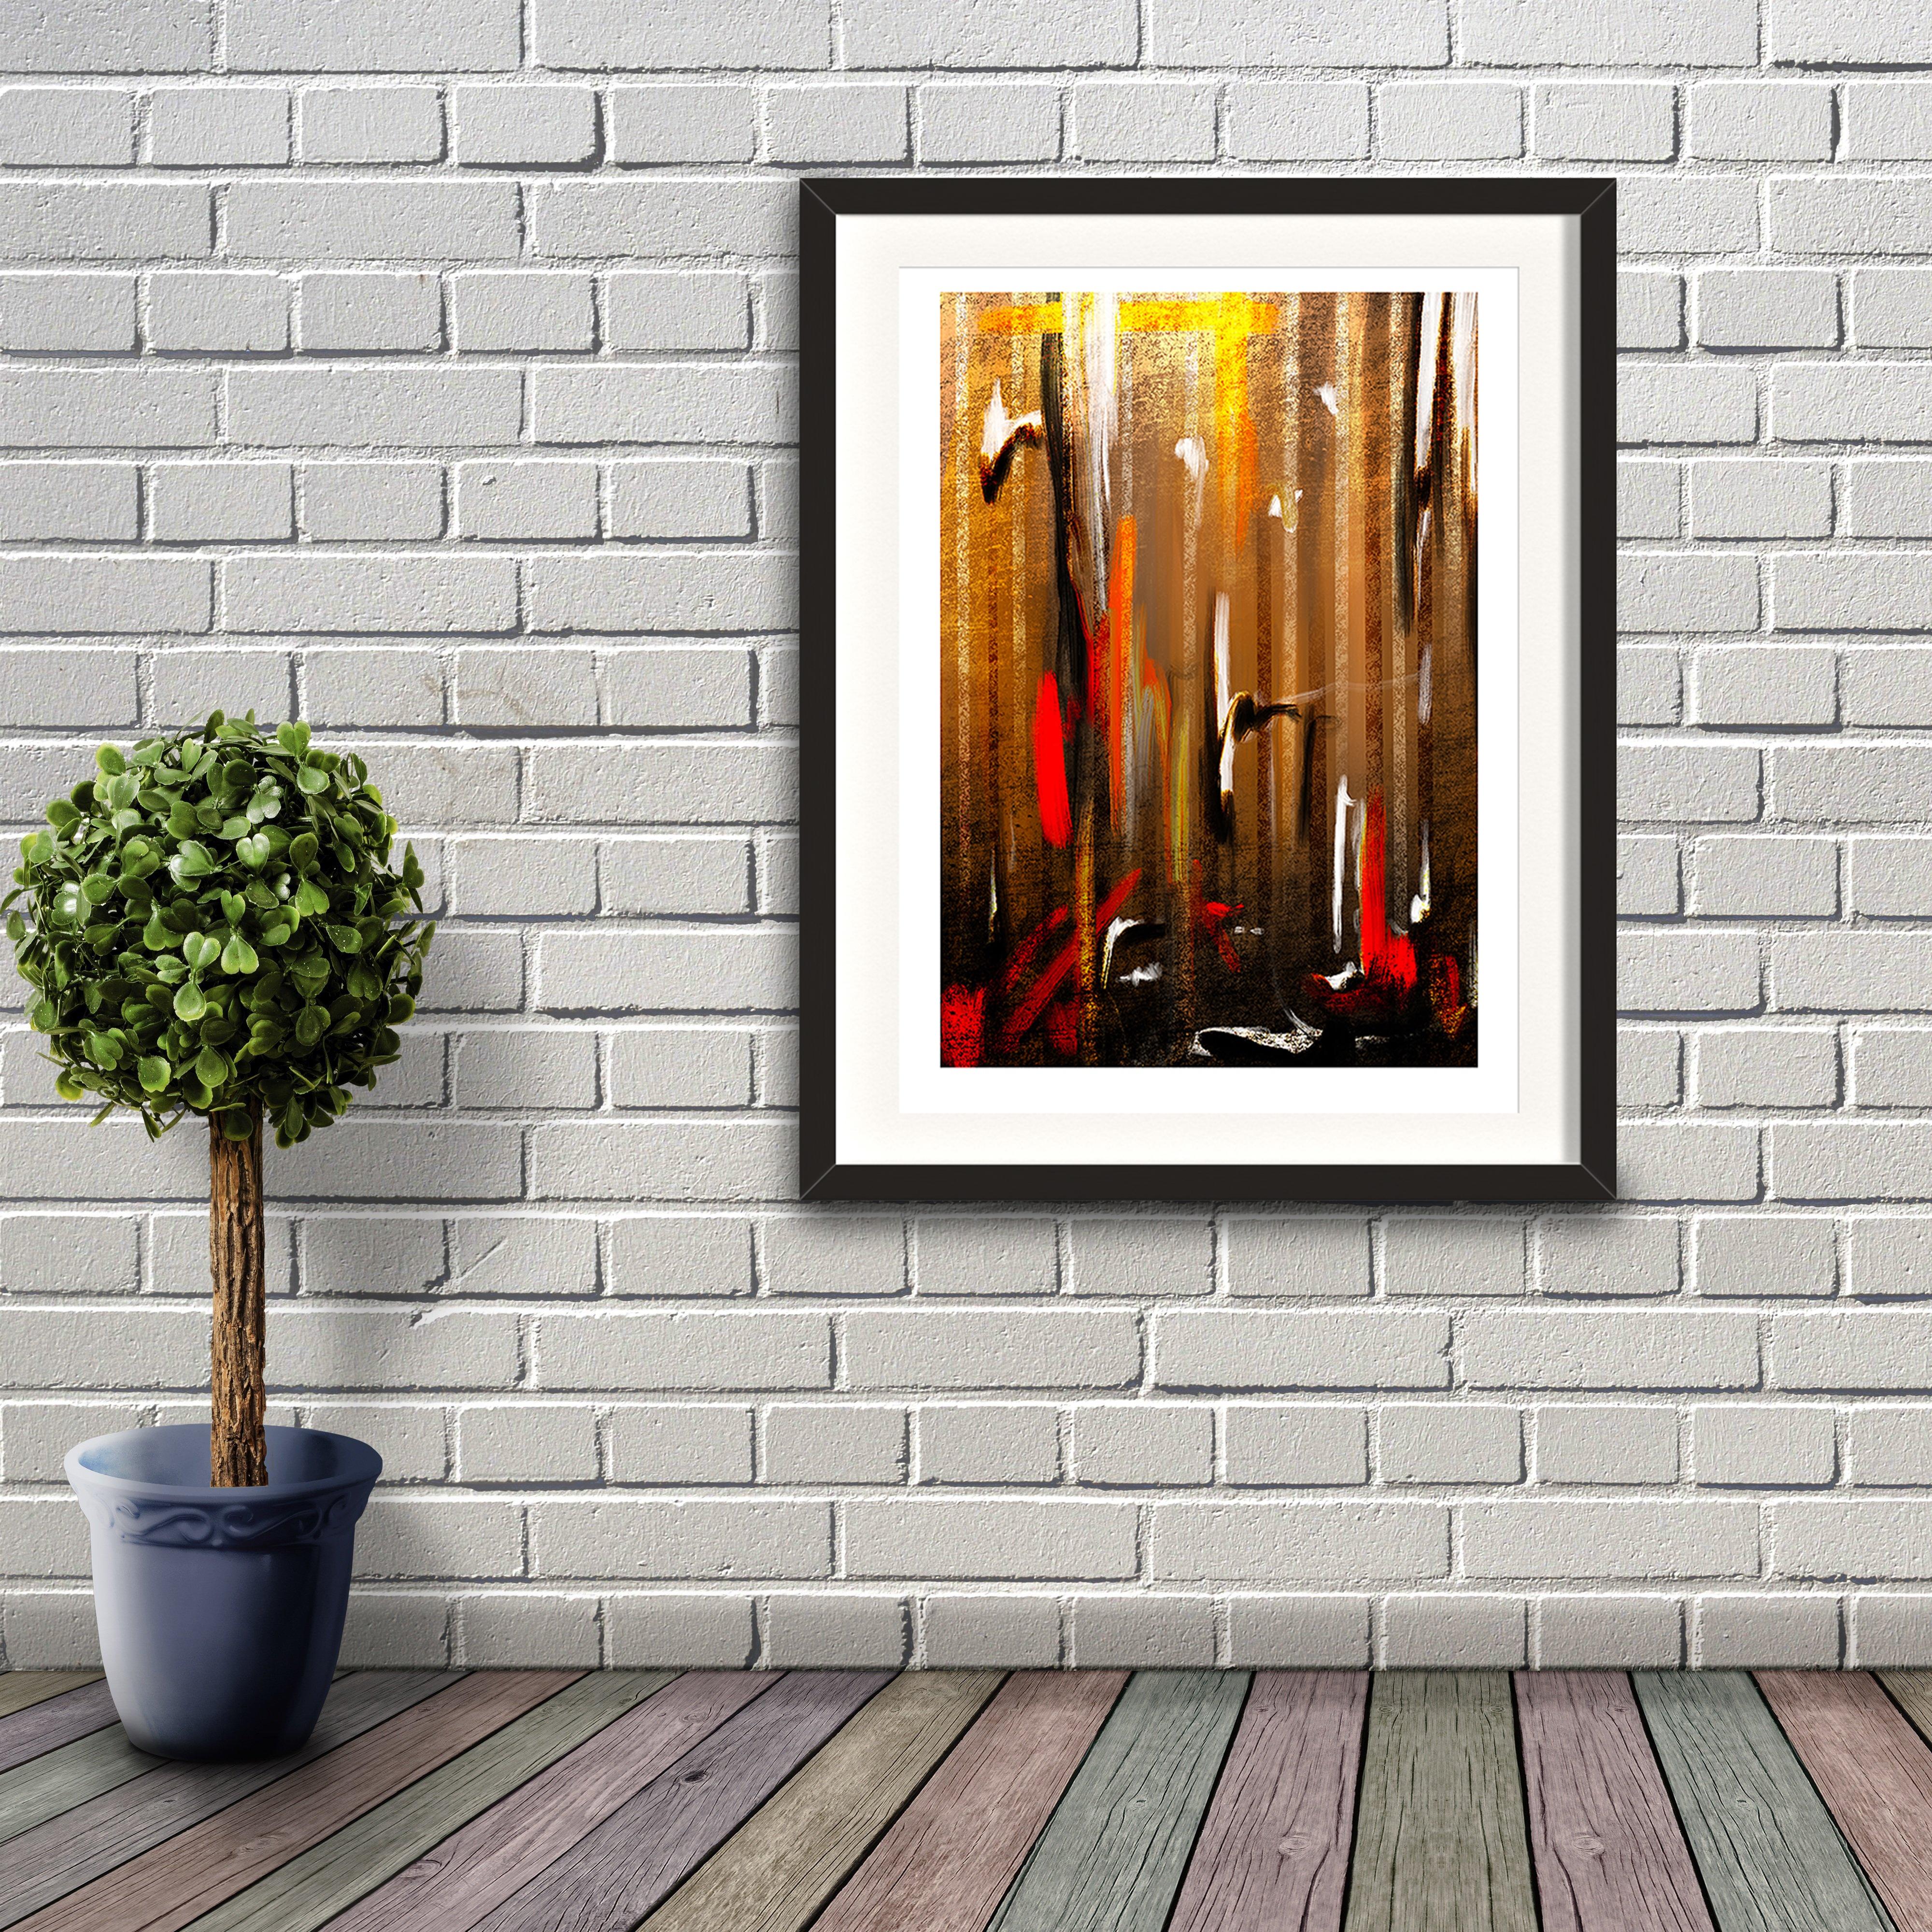 An abstract digital painting by Lily Bourne printed on eco fine art paper titled Autumnal Burst showing orange, red, white and black downward strokes portraying trees with the colours of autumn. Artwork is shown in a black frame hanging on a brick wall.